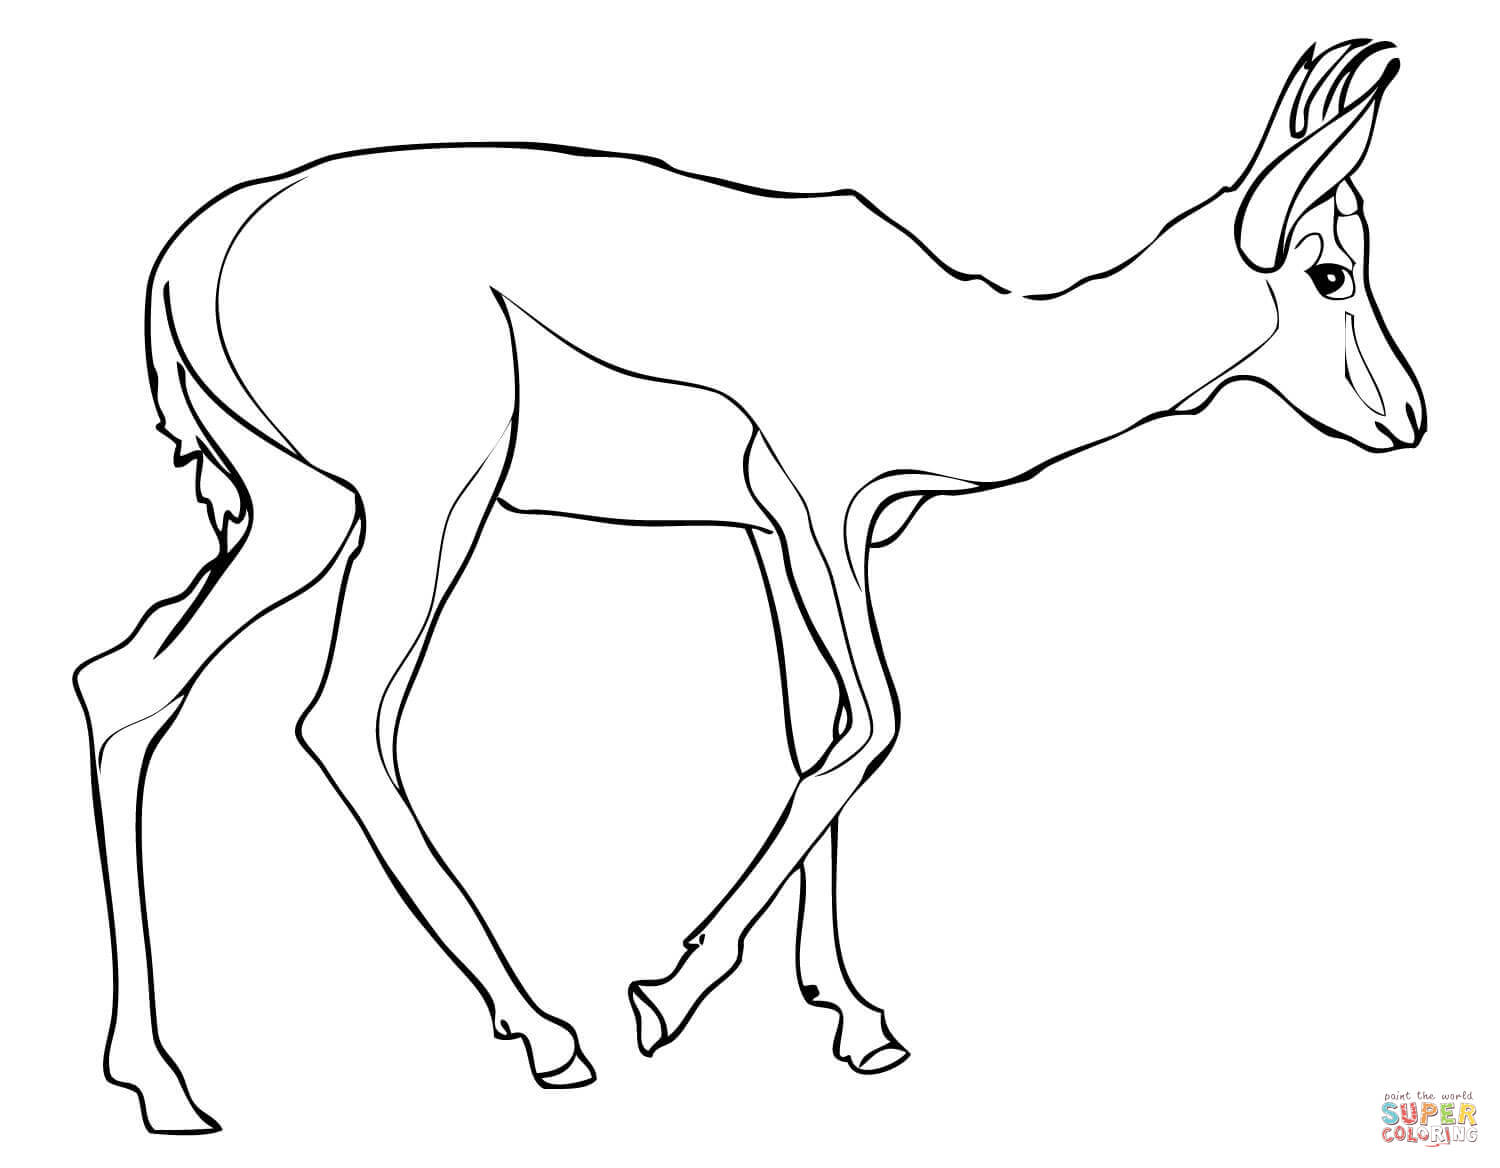 Thomson's gazelle coloring page | Free Printable Coloring Pages